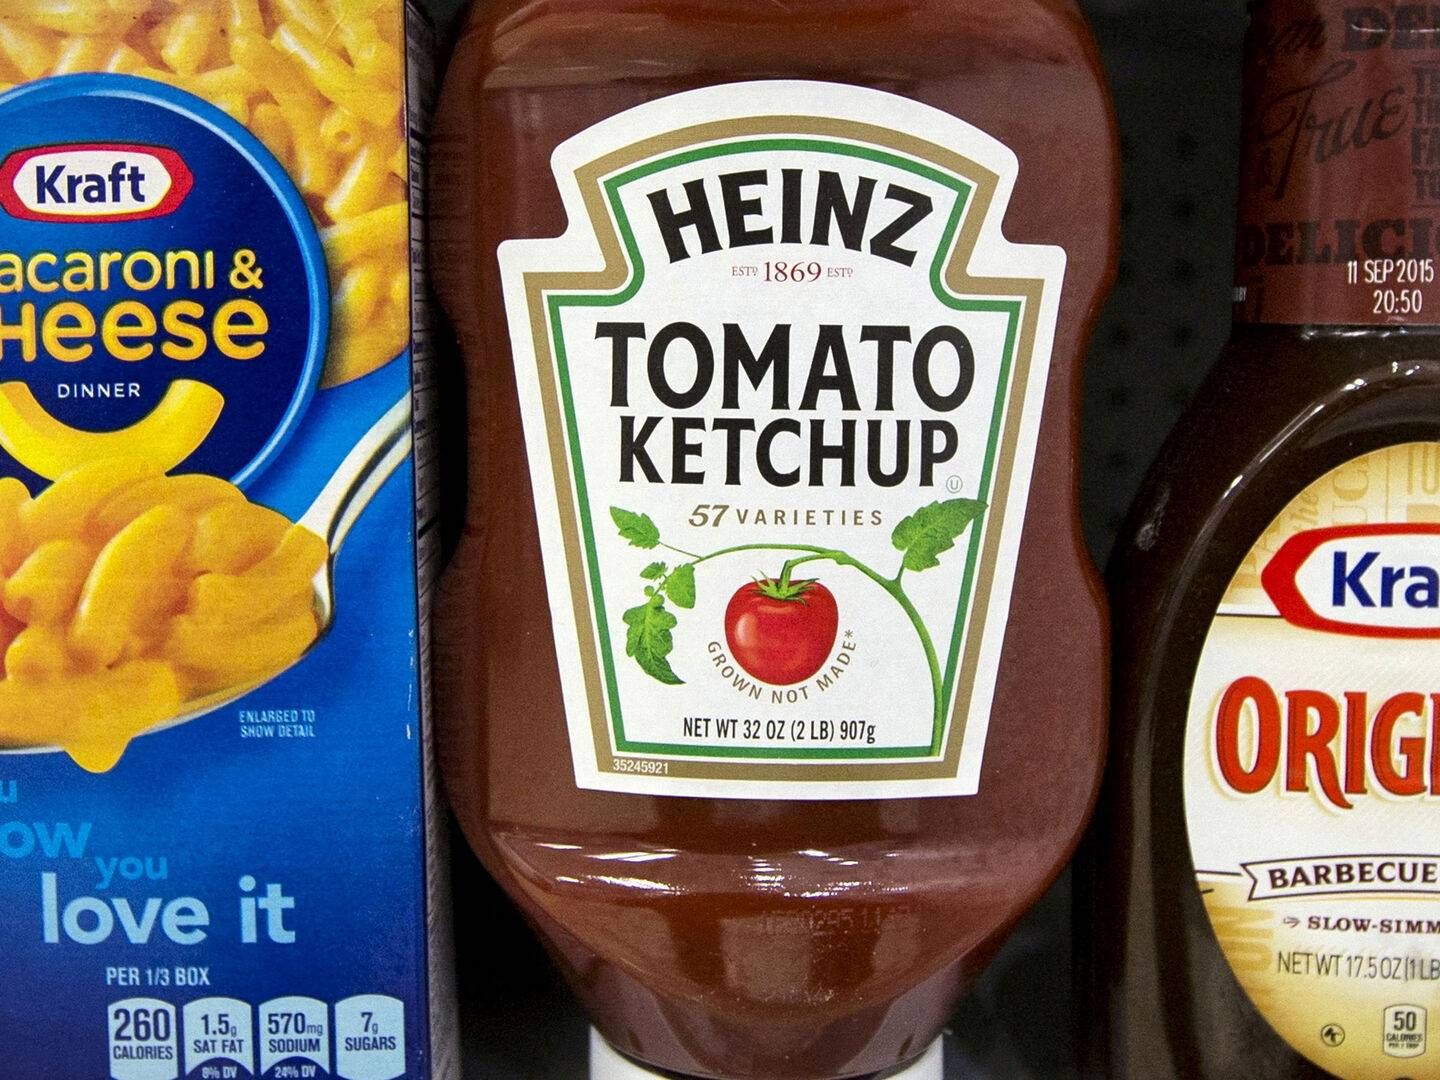 The Kraft Heinz Group has agreed to pay USD 450m in a settlement with a group of plaintiffs.